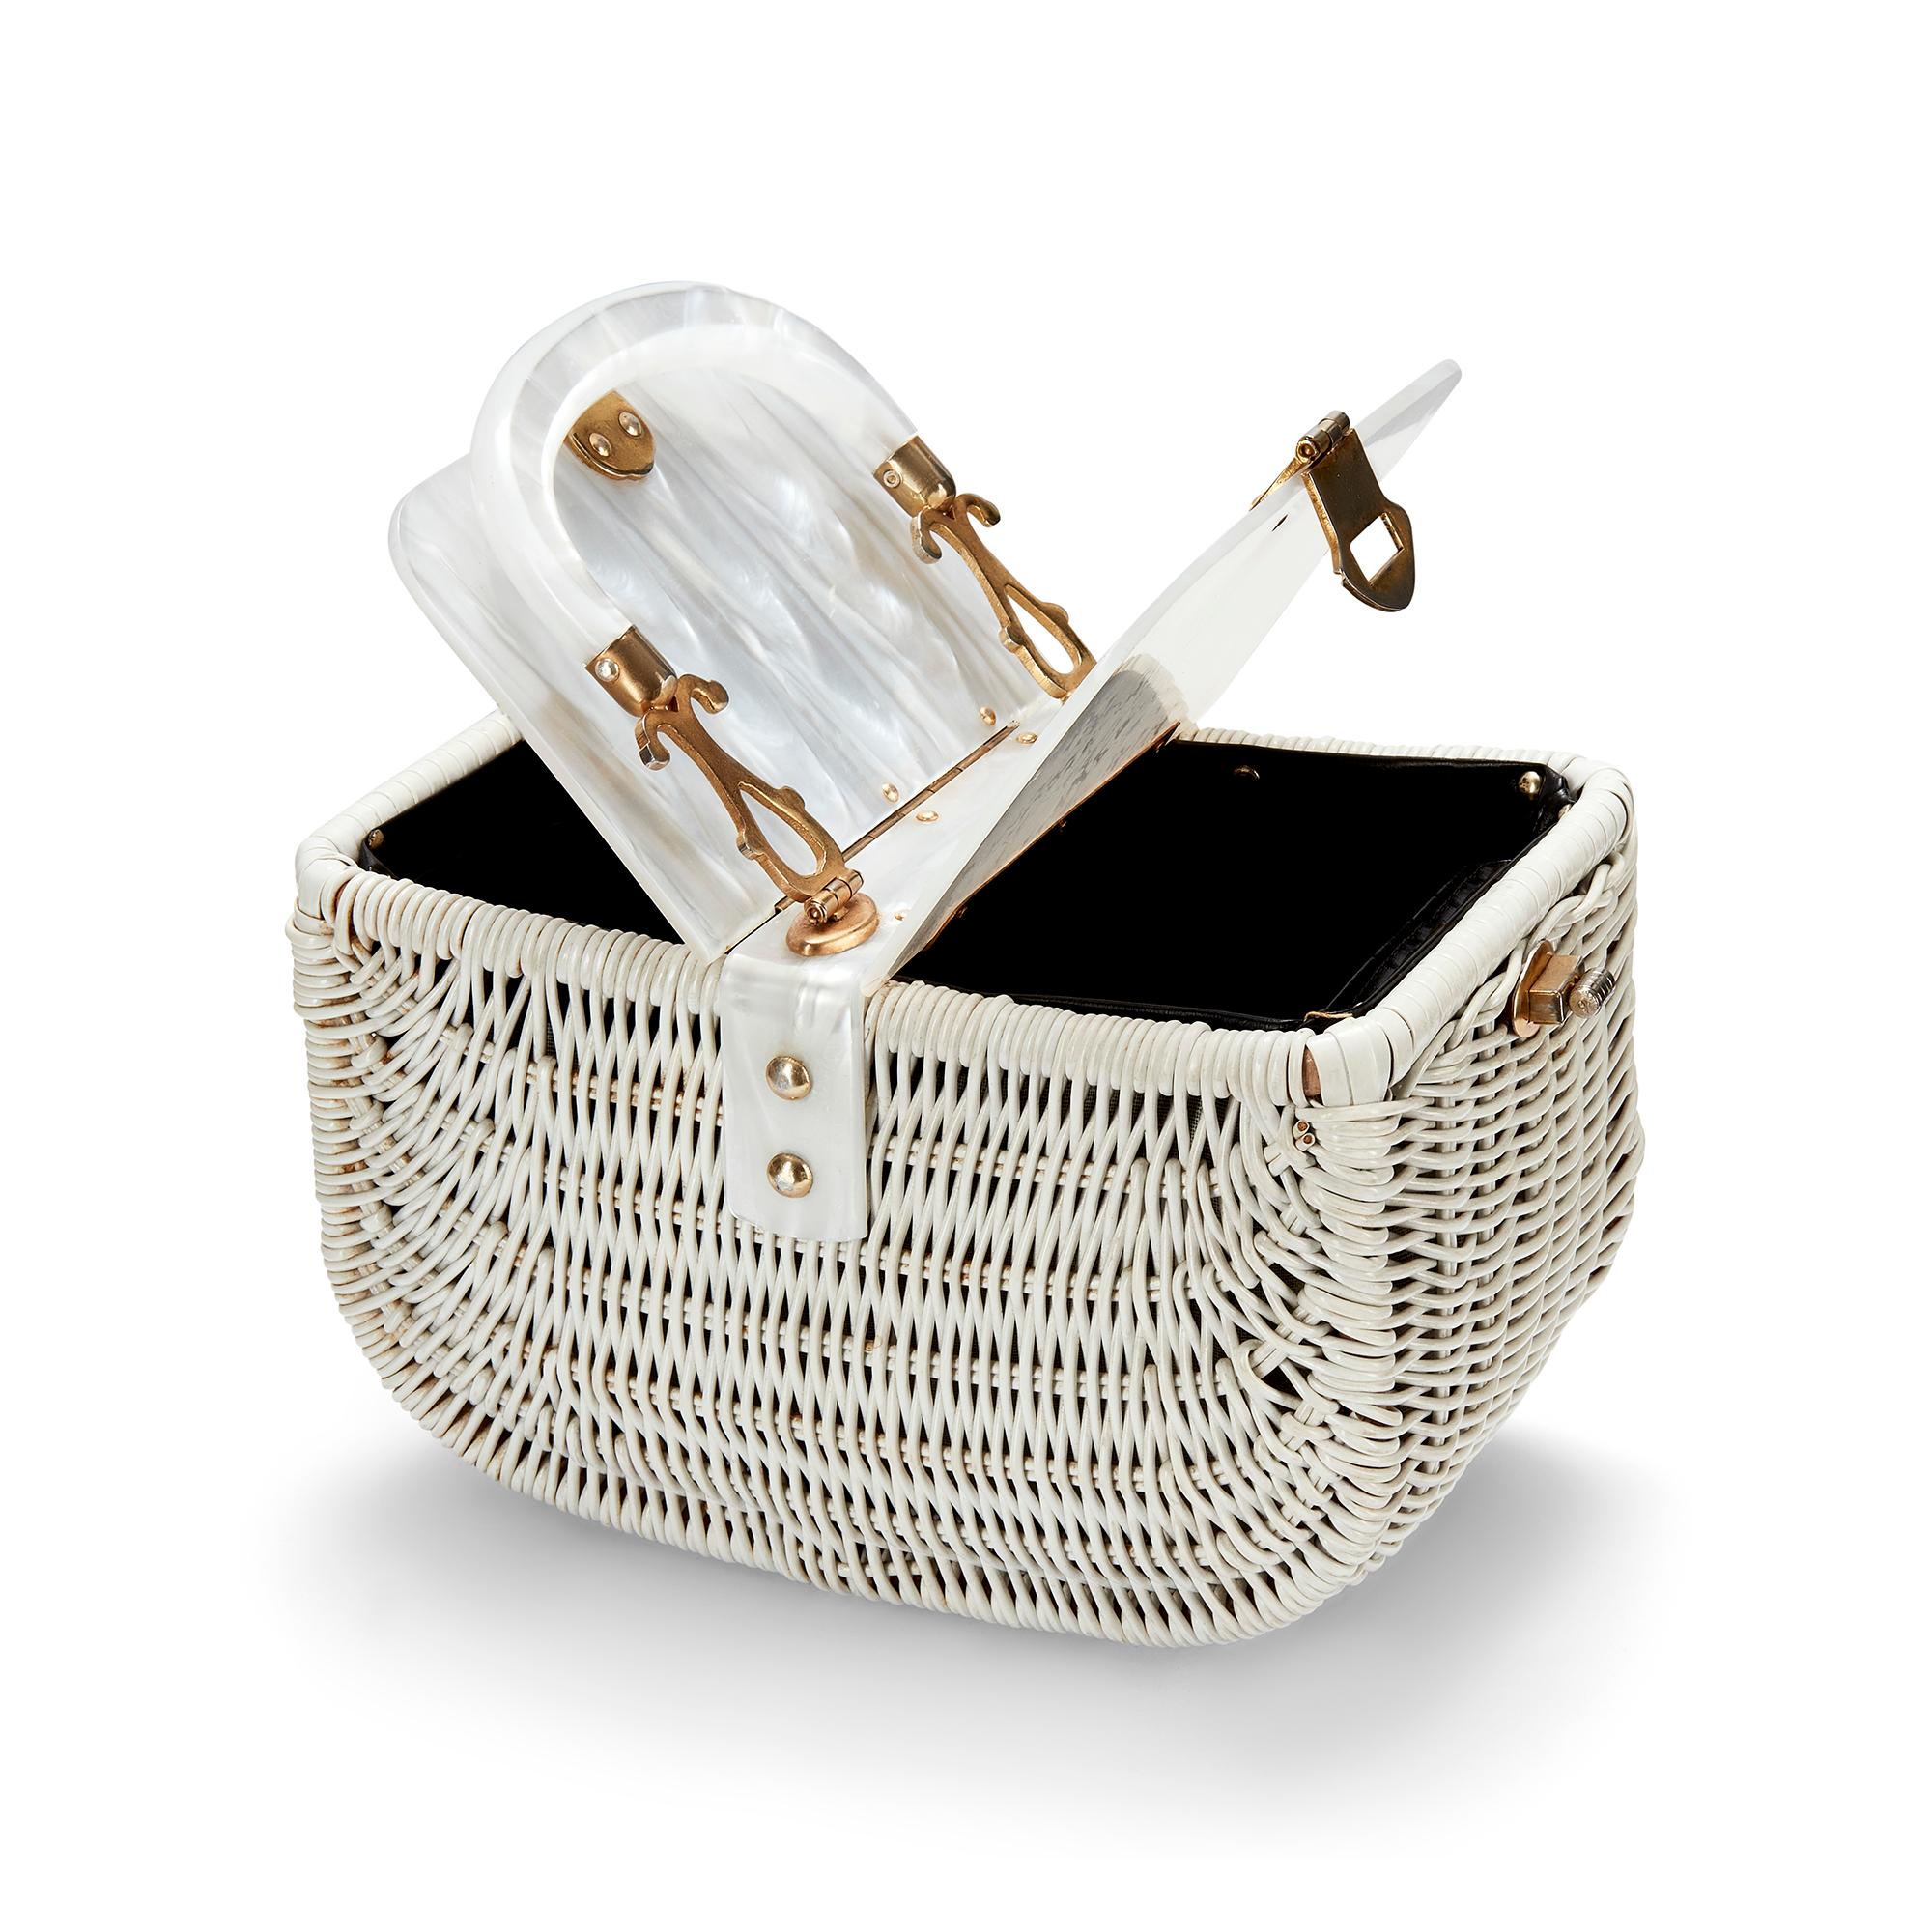 This super-sweet basket bag was created in the 1950s. It has a white woven lacquered body and is finished with a decadent pearlescent lucite top. The lid opens on two sides and is secured with intricate gold-toned brass hardware. The elaborate